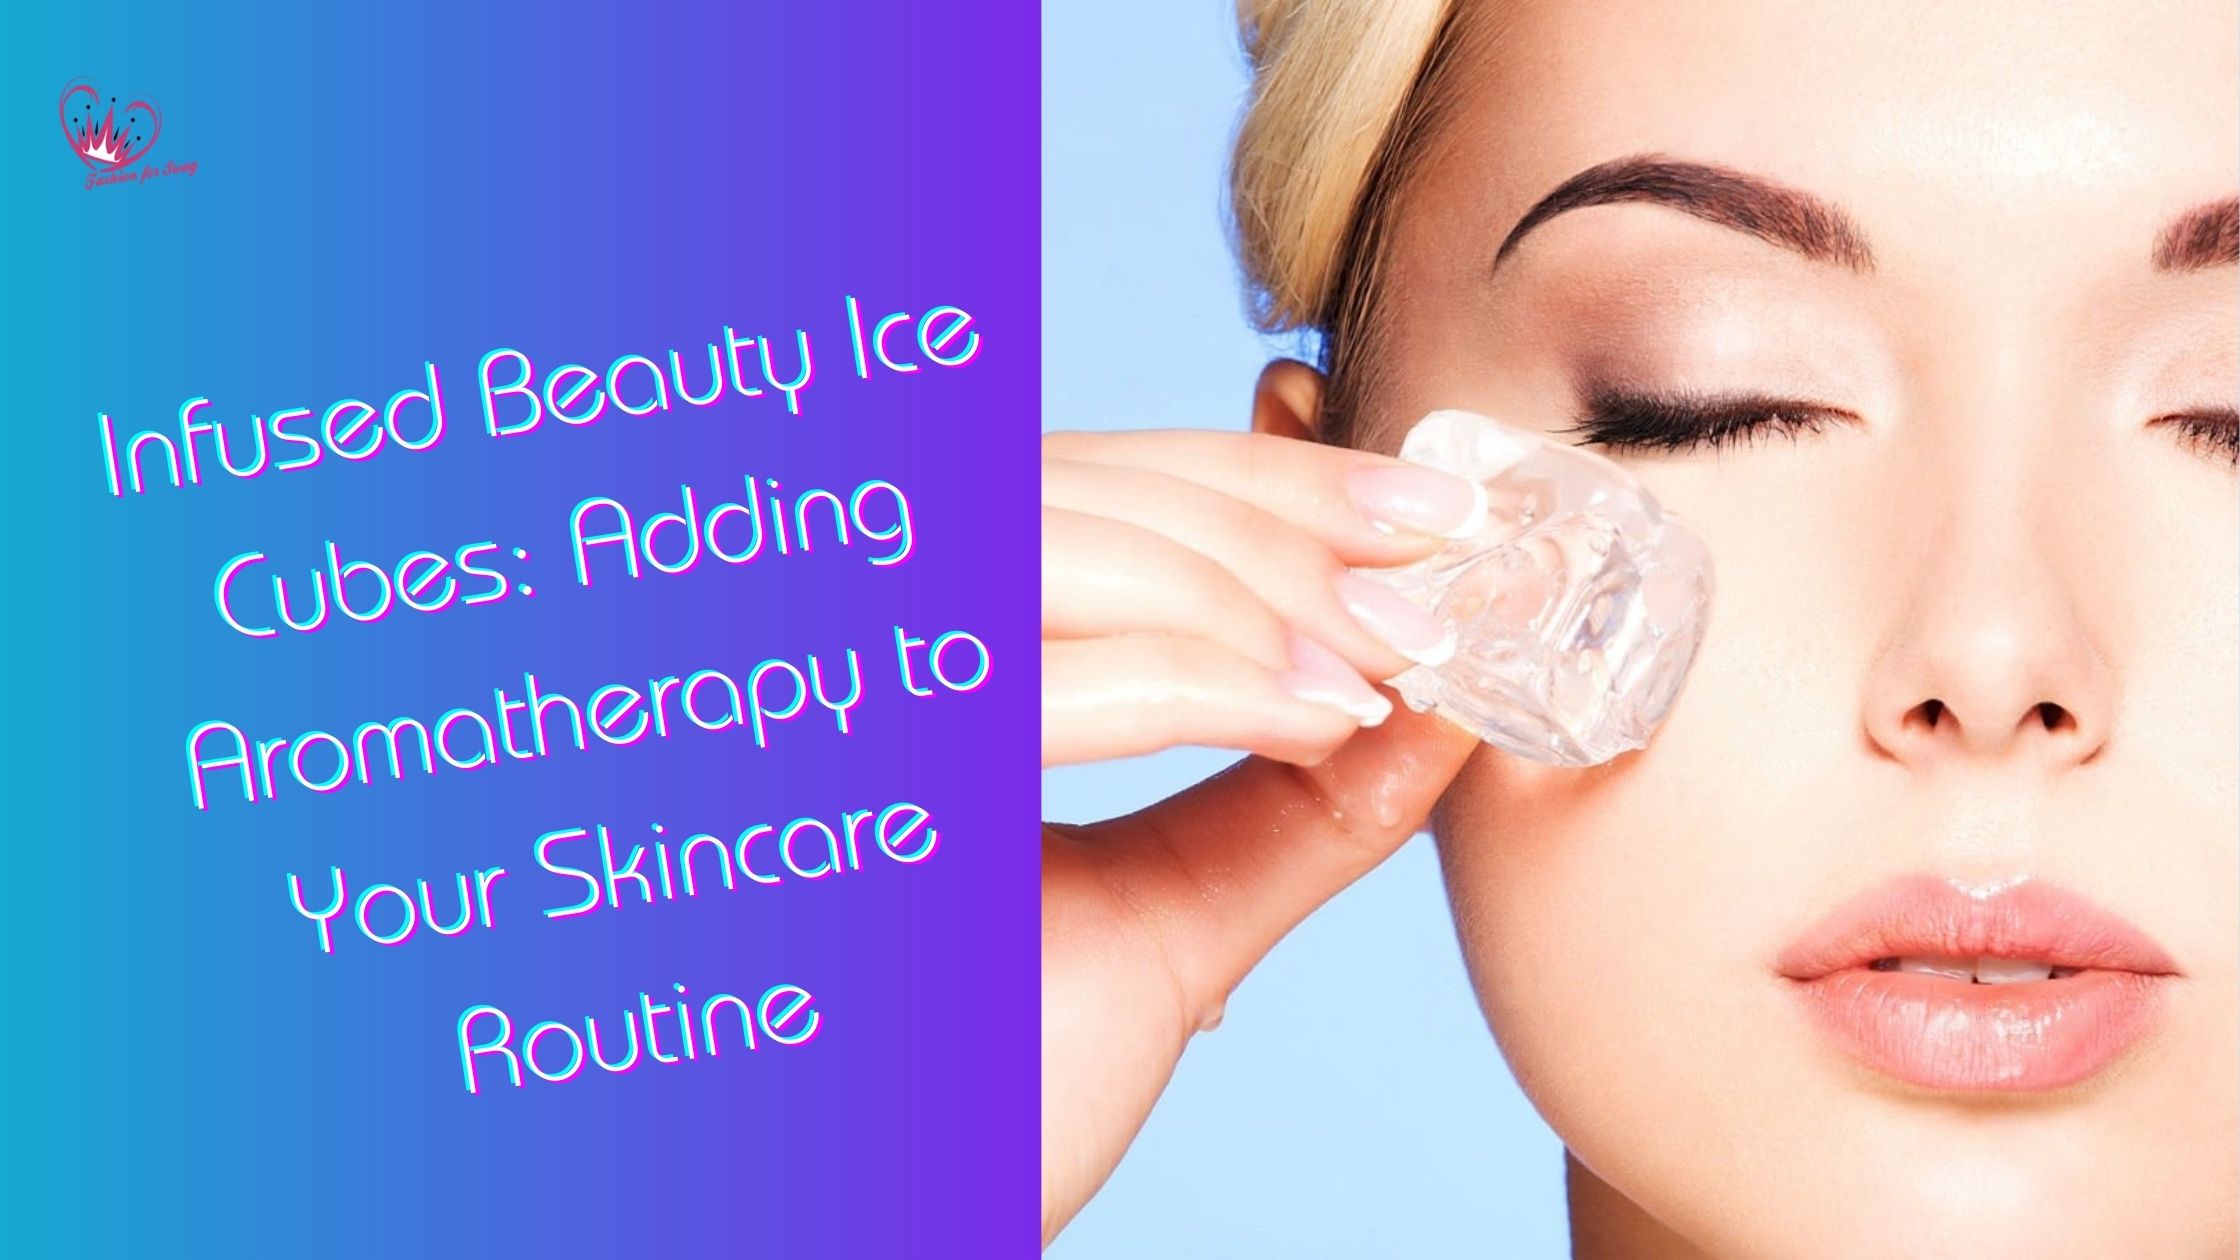 Infused Beauty Ice Cubes: Adding Aromatherapy to Your Skincare Routine